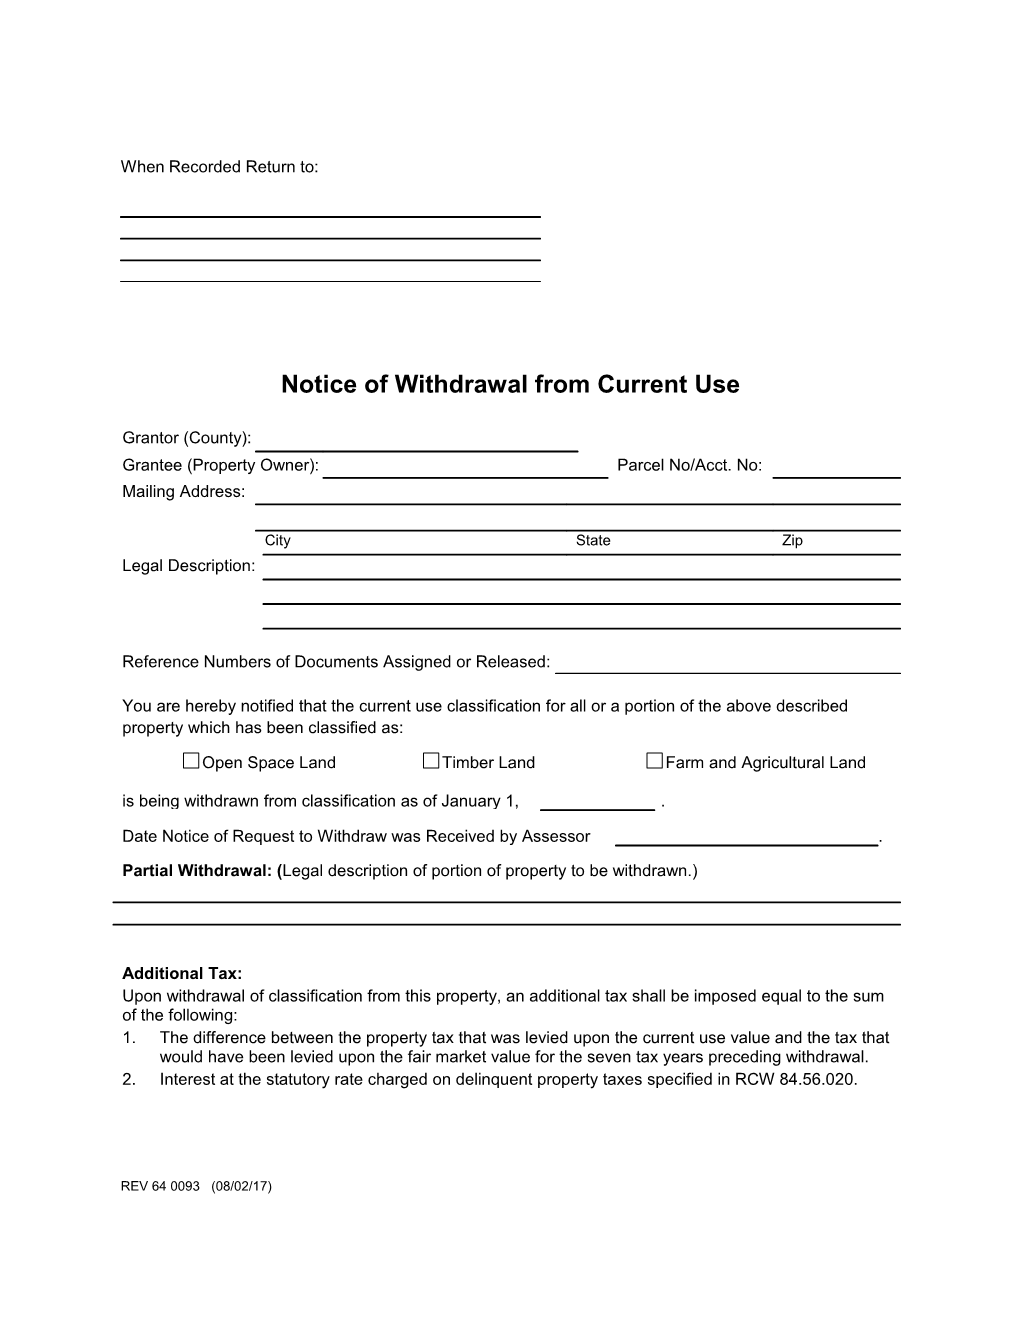 Notice of Withdrawal from Current Use